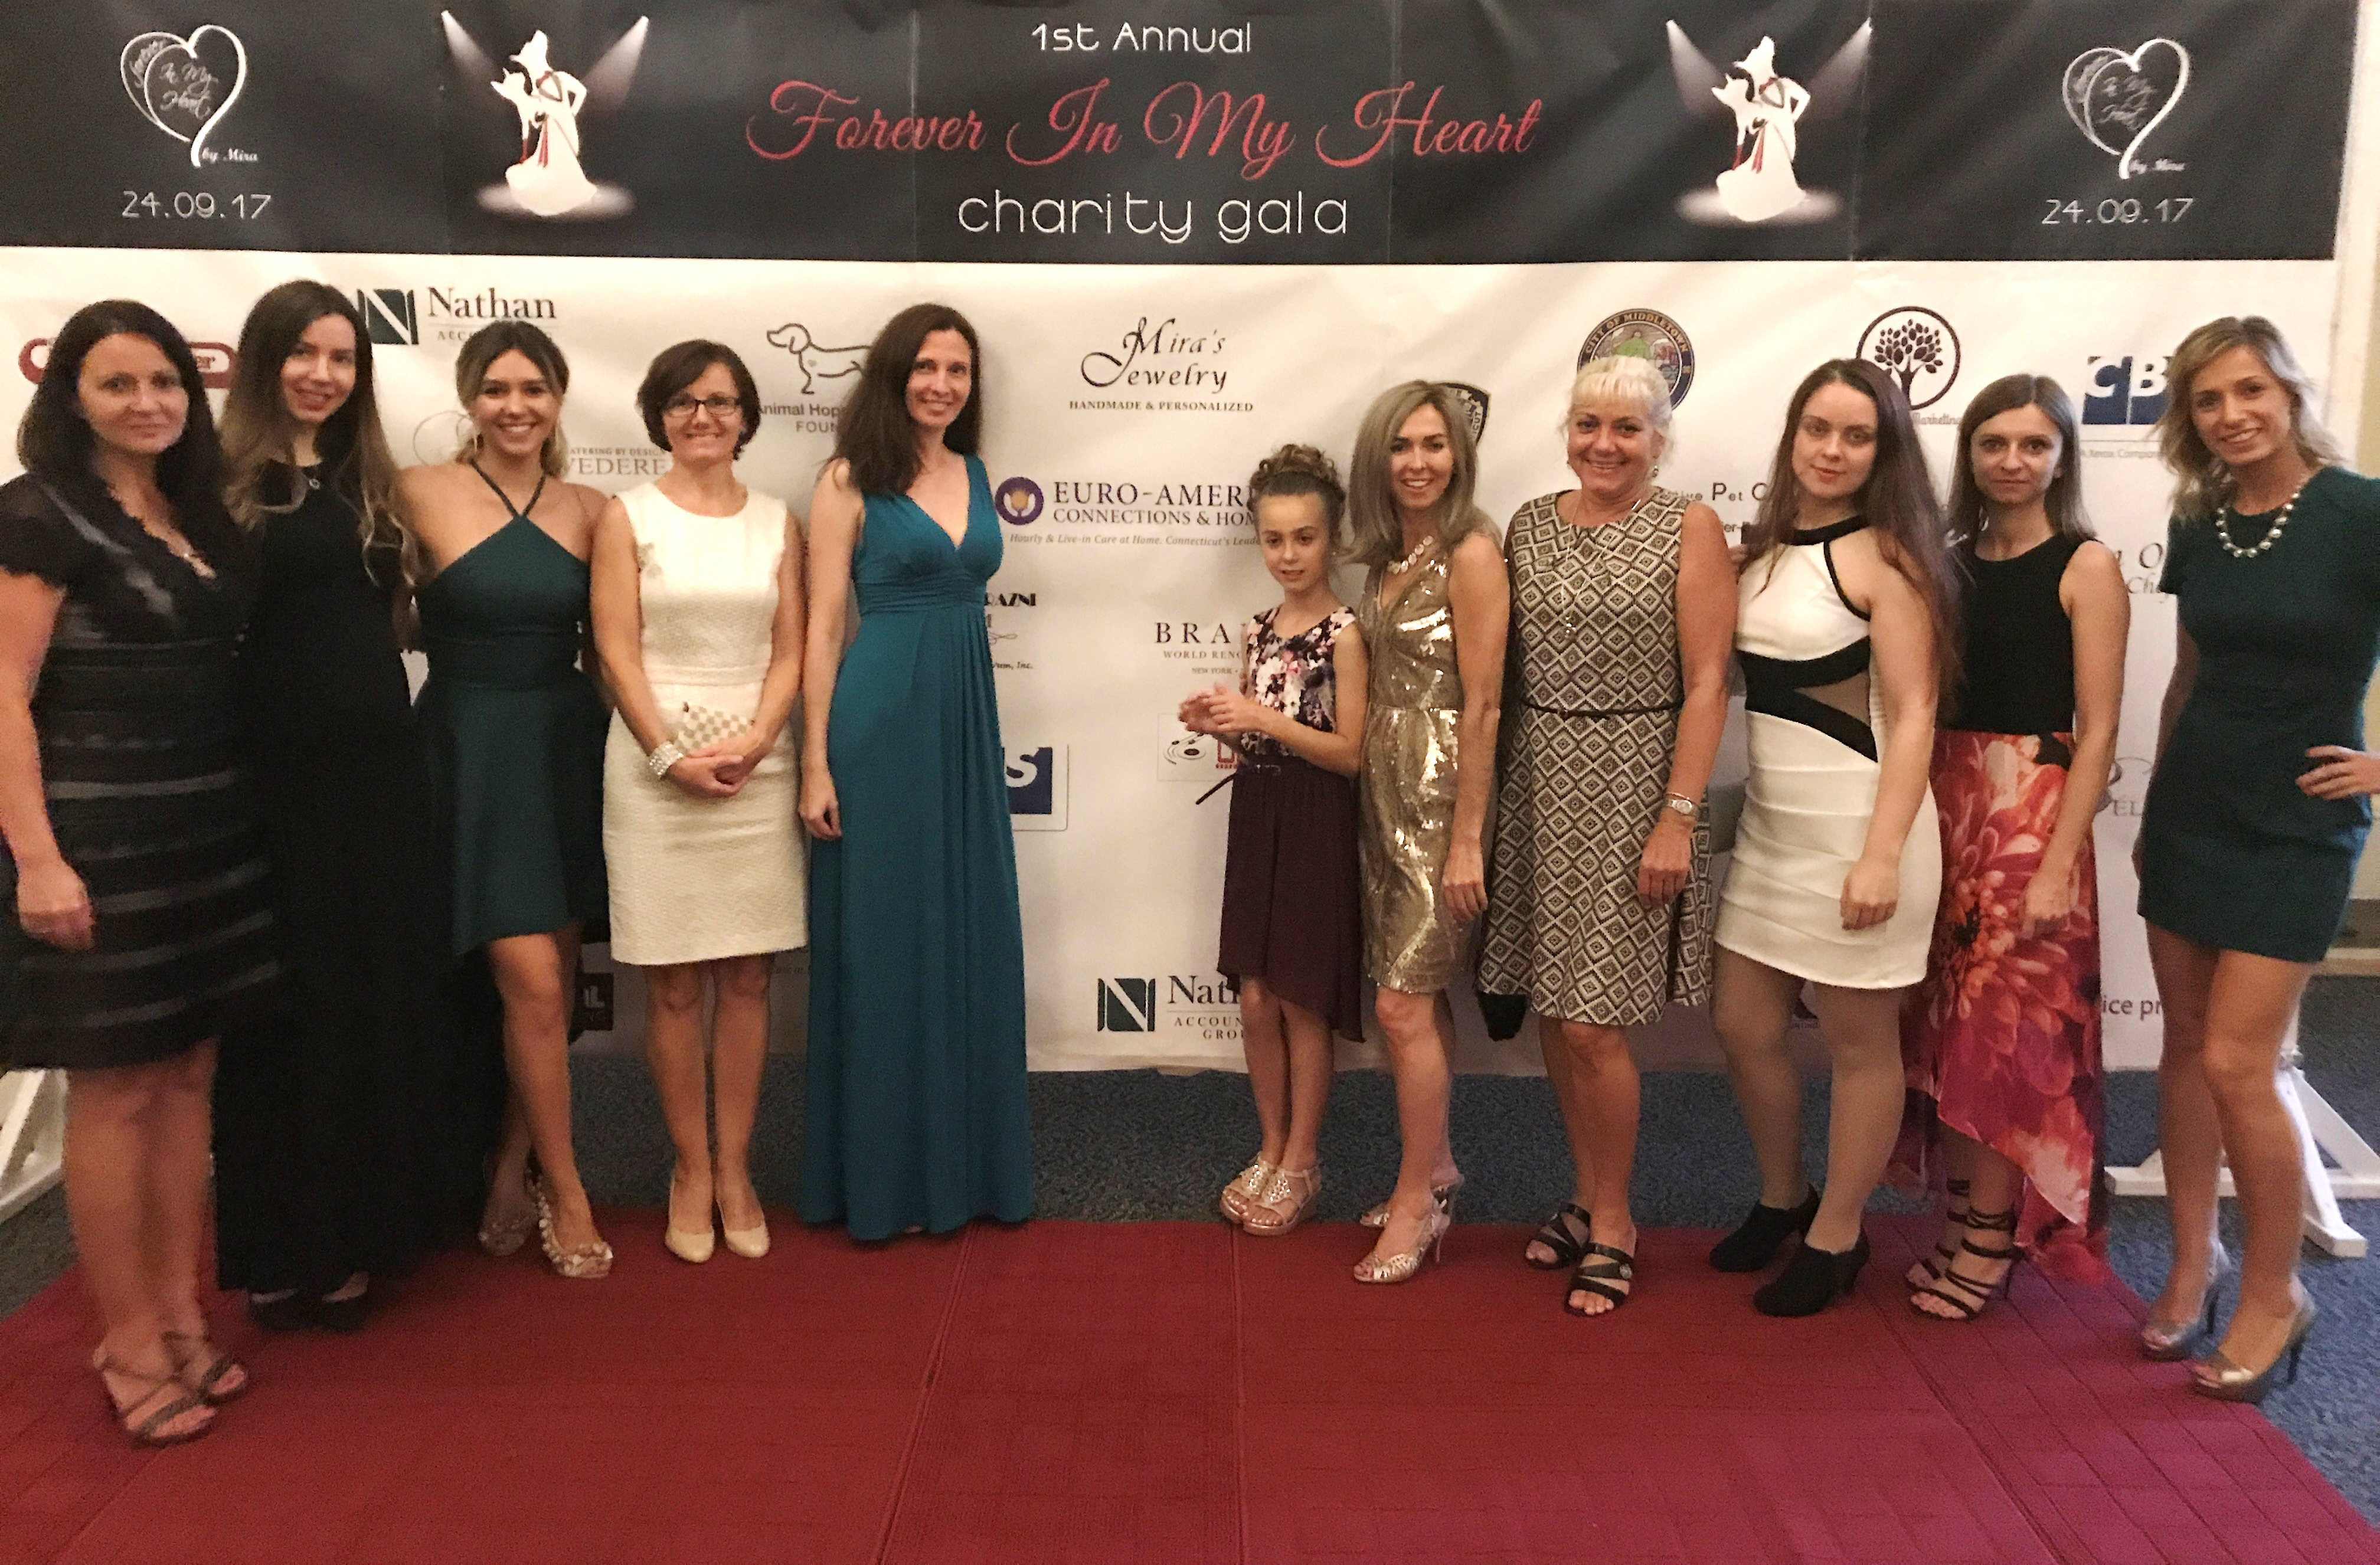 Euro-American Connections & Homecare to Sponsor 2nd Annual Forever in My Heart Charity Gala